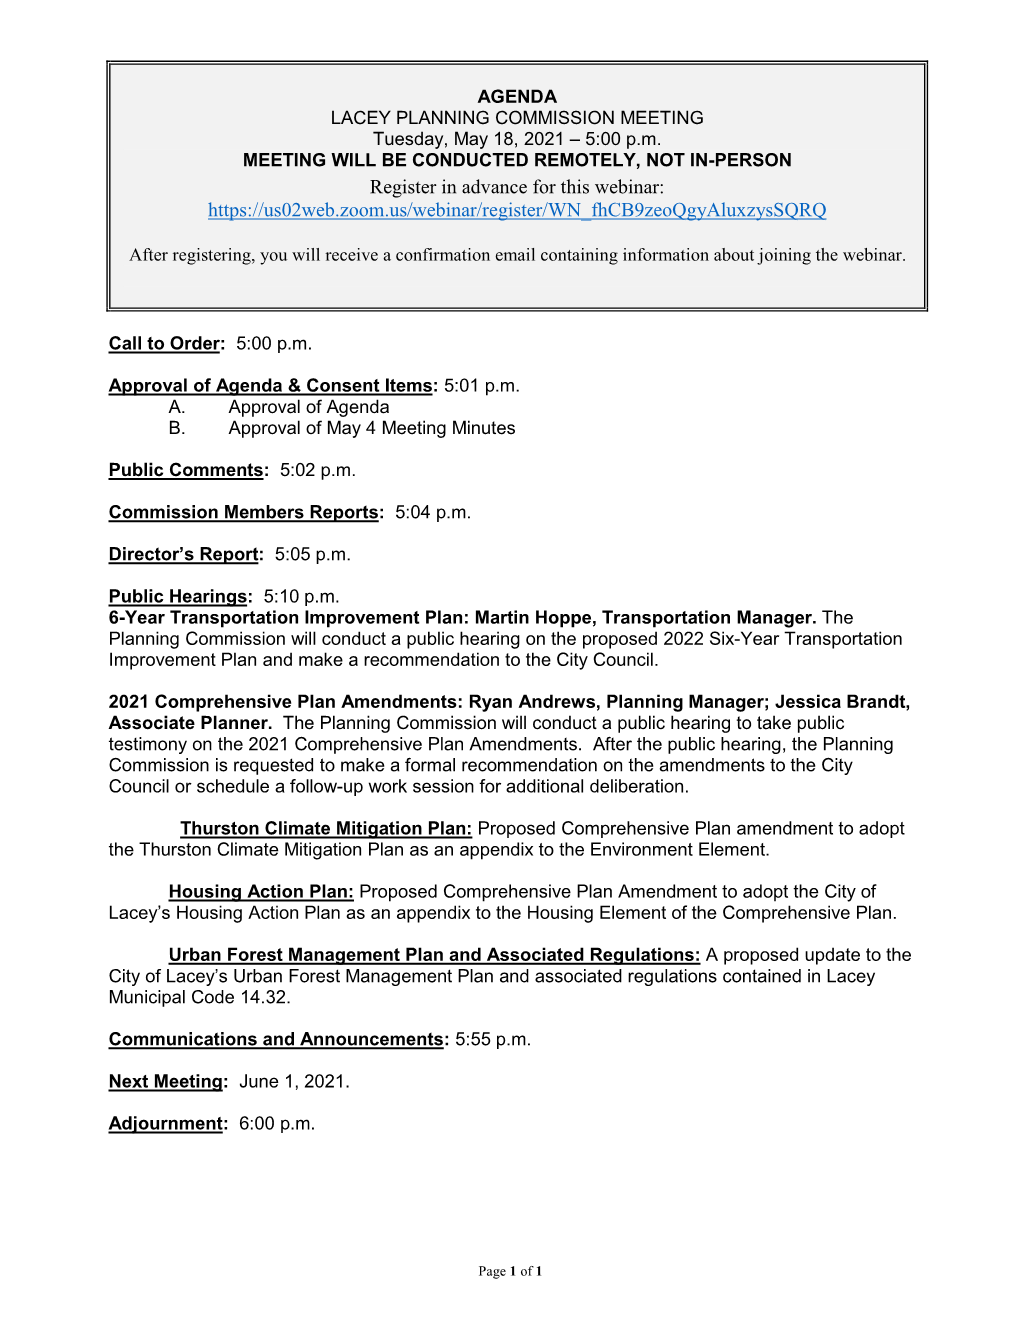 AGENDA LACEY PLANNING COMMISSION MEETING Tuesday, May 18, 2021 – 5:00 P.M